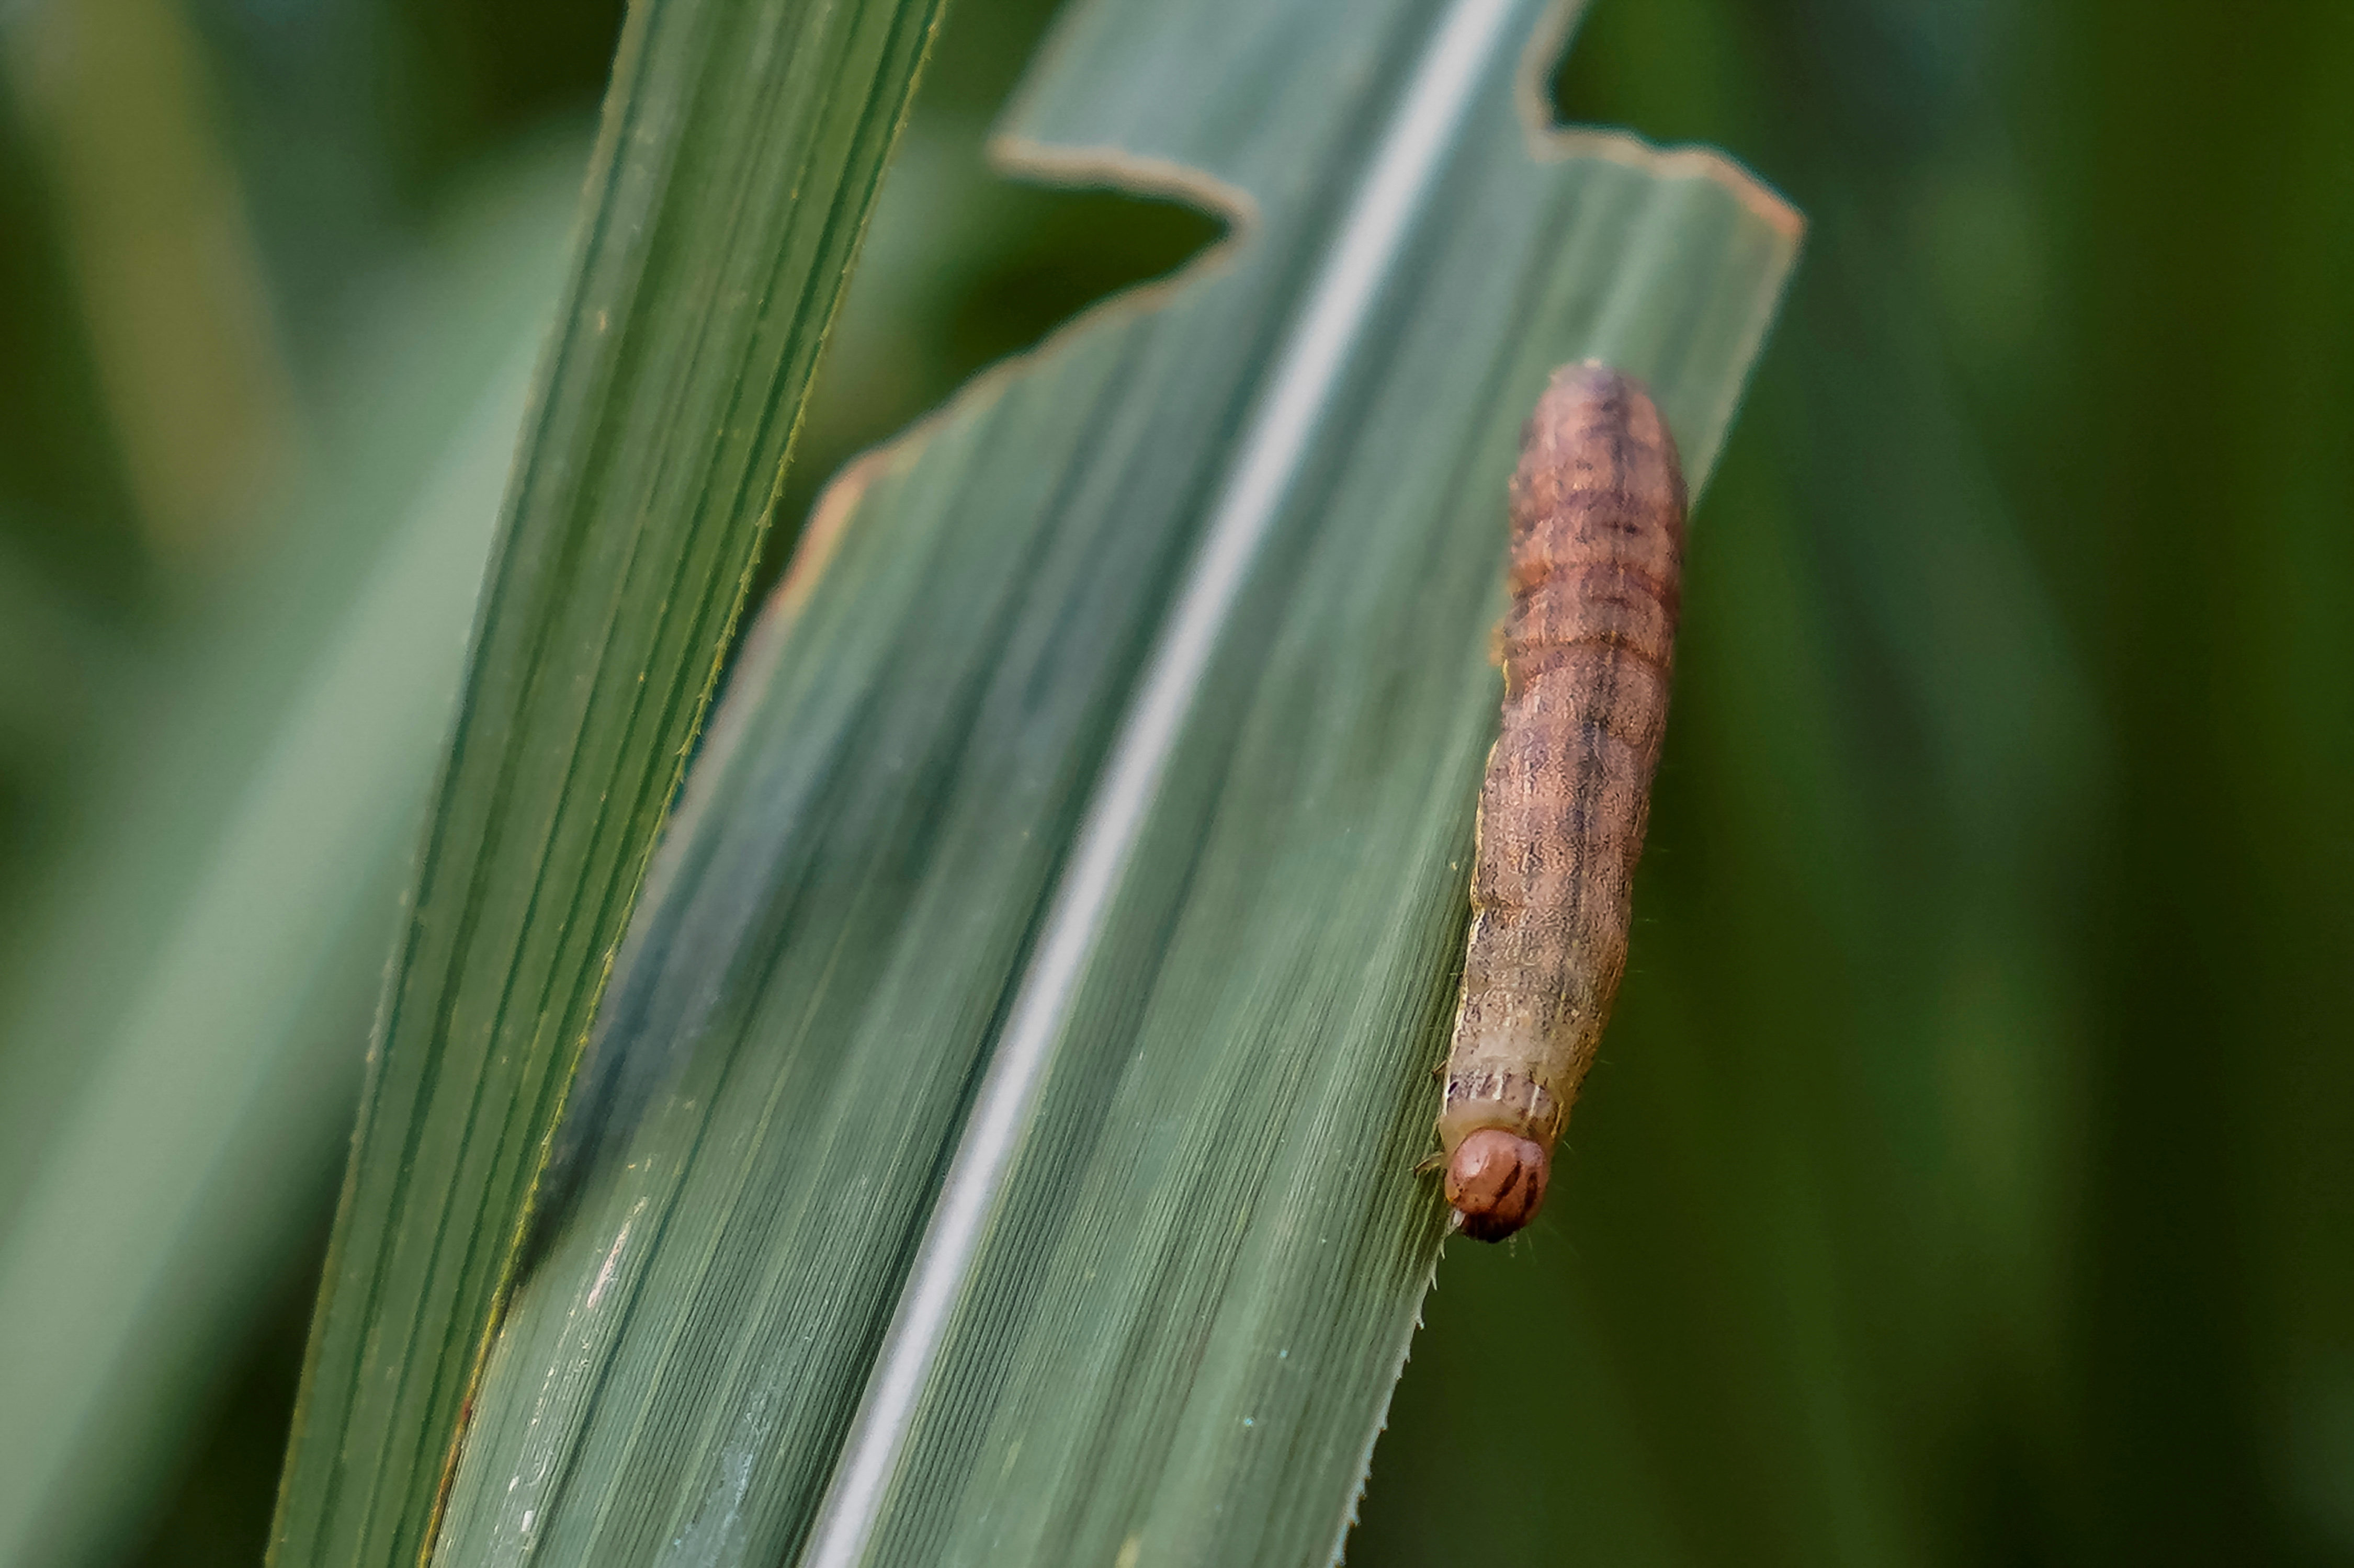 An armyworm, which usually comes out at night, is seen on sugar cane crop around dusk at a village of Menghai county